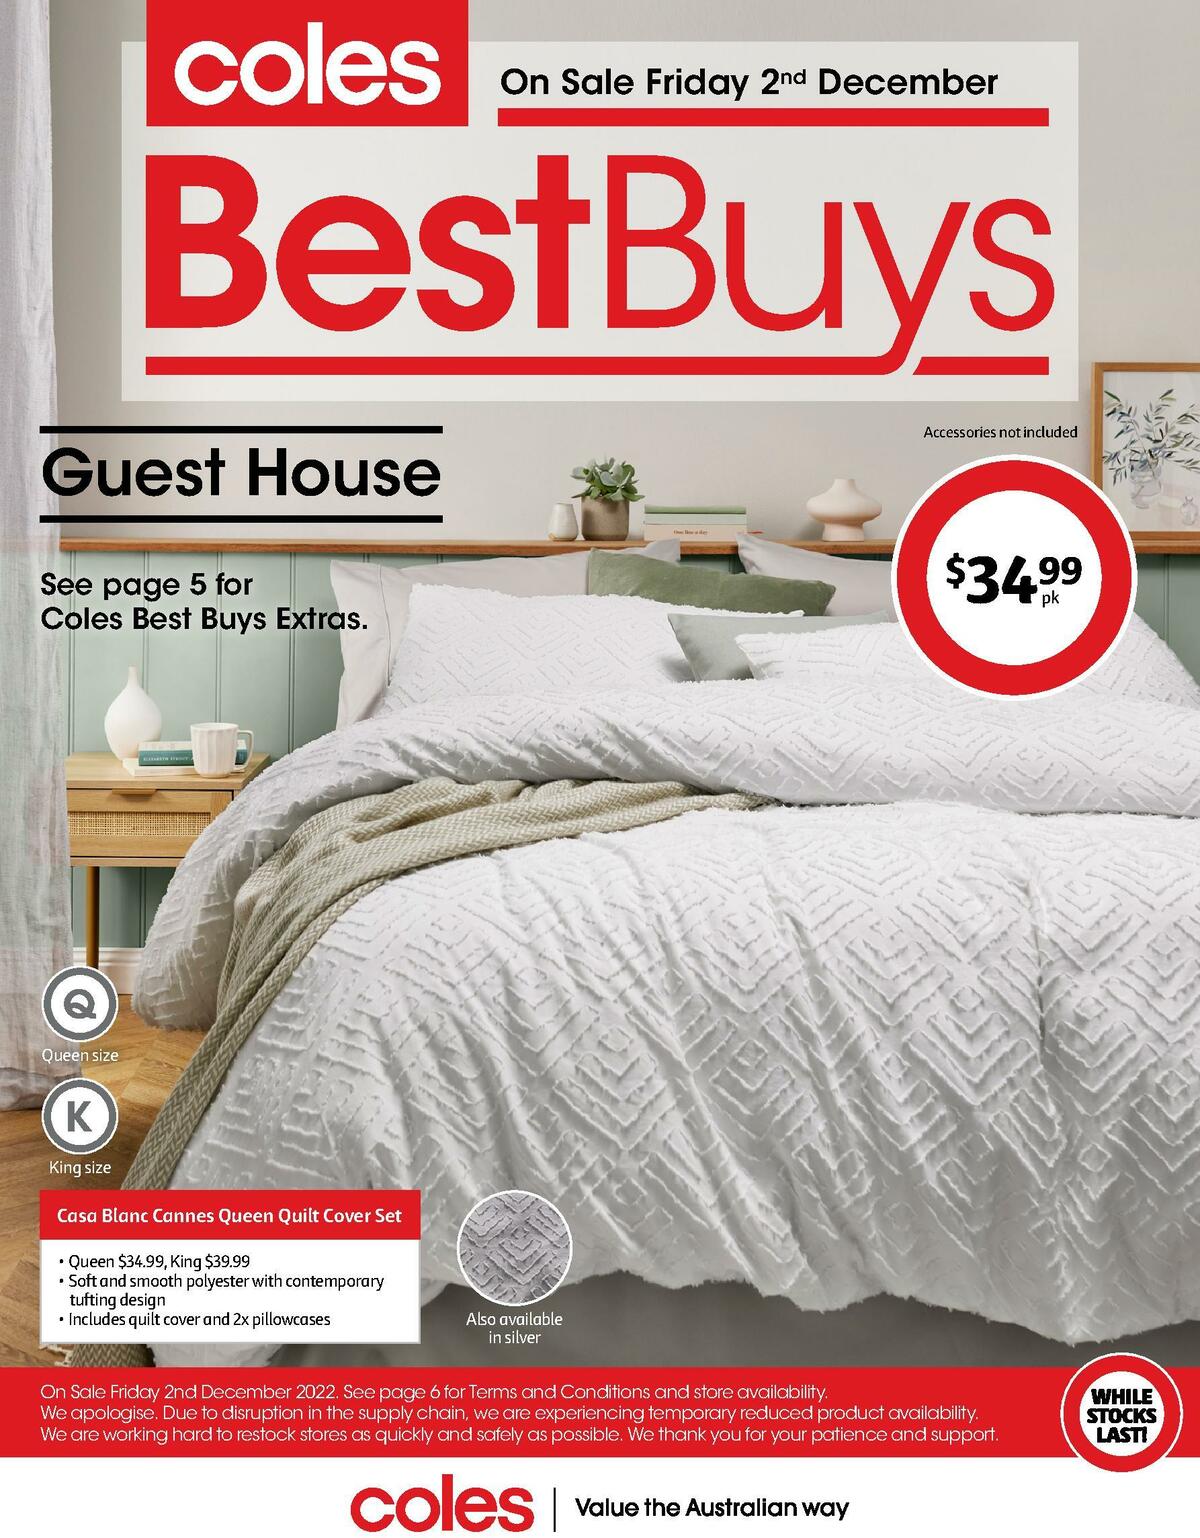 Coles Best Buys - Guest House Catalogues from 2 December